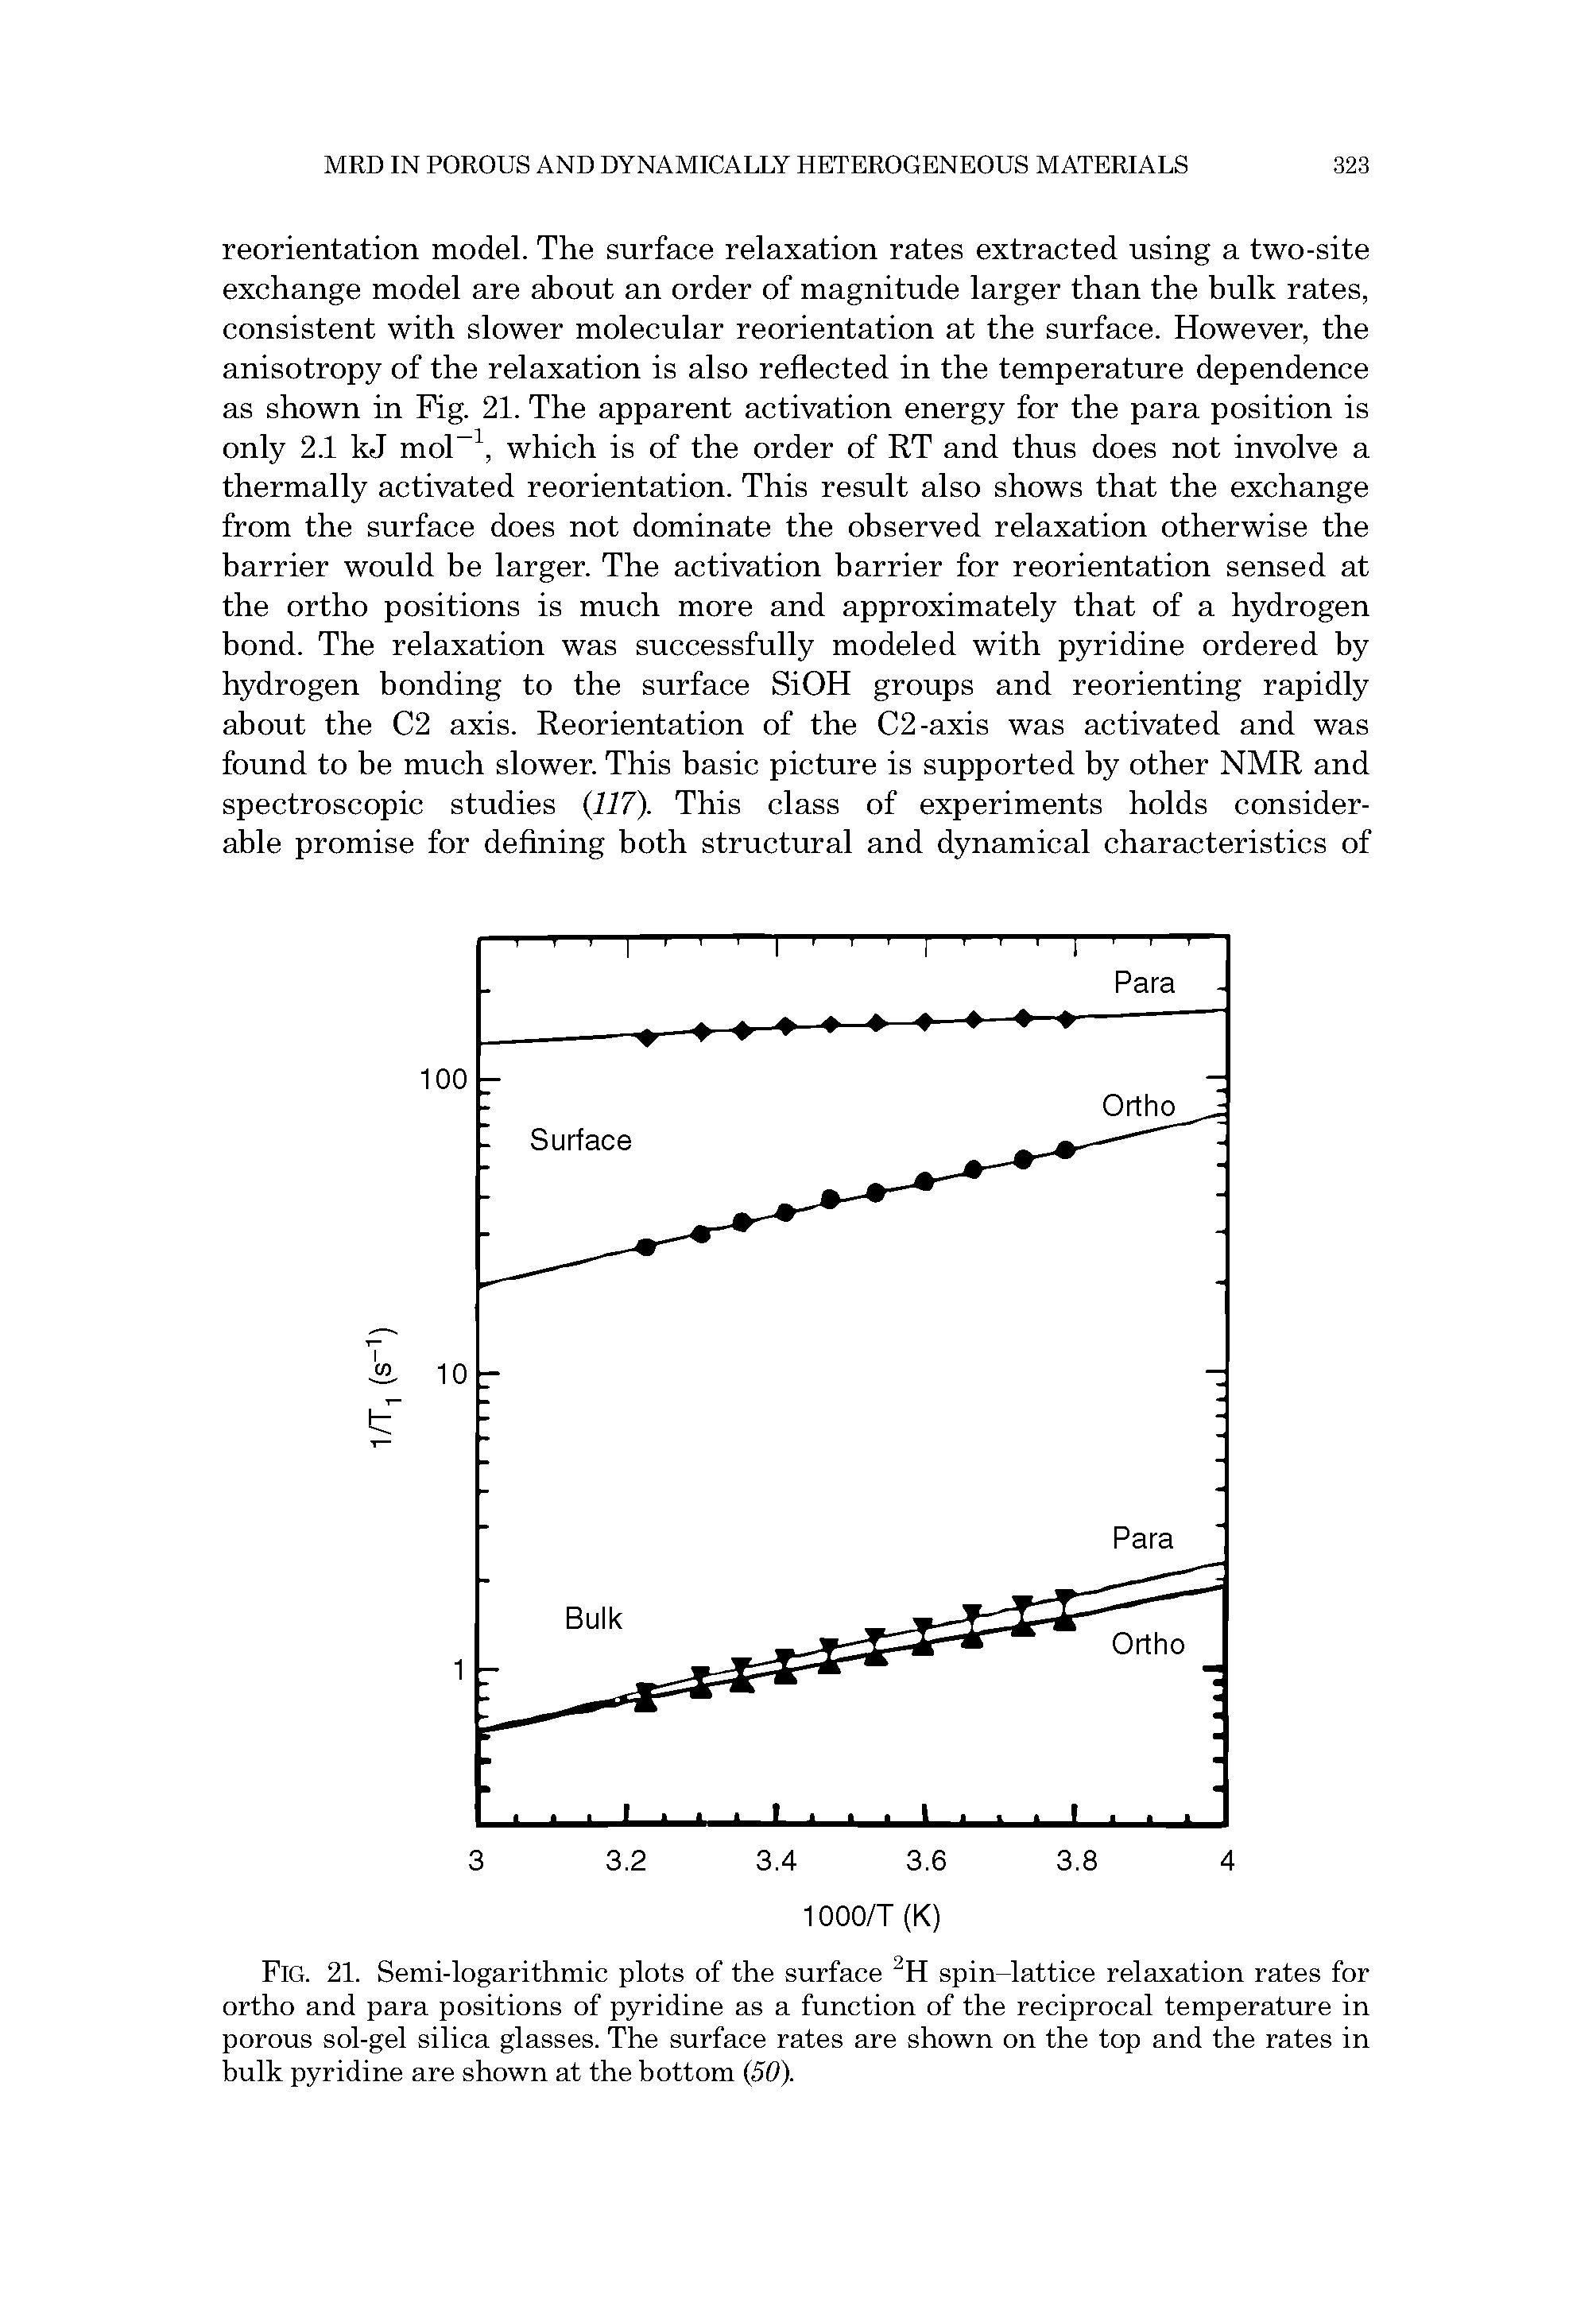 Fig. 21. Semi-logarithmic plots of the surface spin-lattice relaxation rates for ortho and para positions of pyridine as a function of the reciprocal temperature in porous sol-gel silica glasses. The surface rates are shown on the top and the rates in bulk pyridine are shown at the bottom 50).